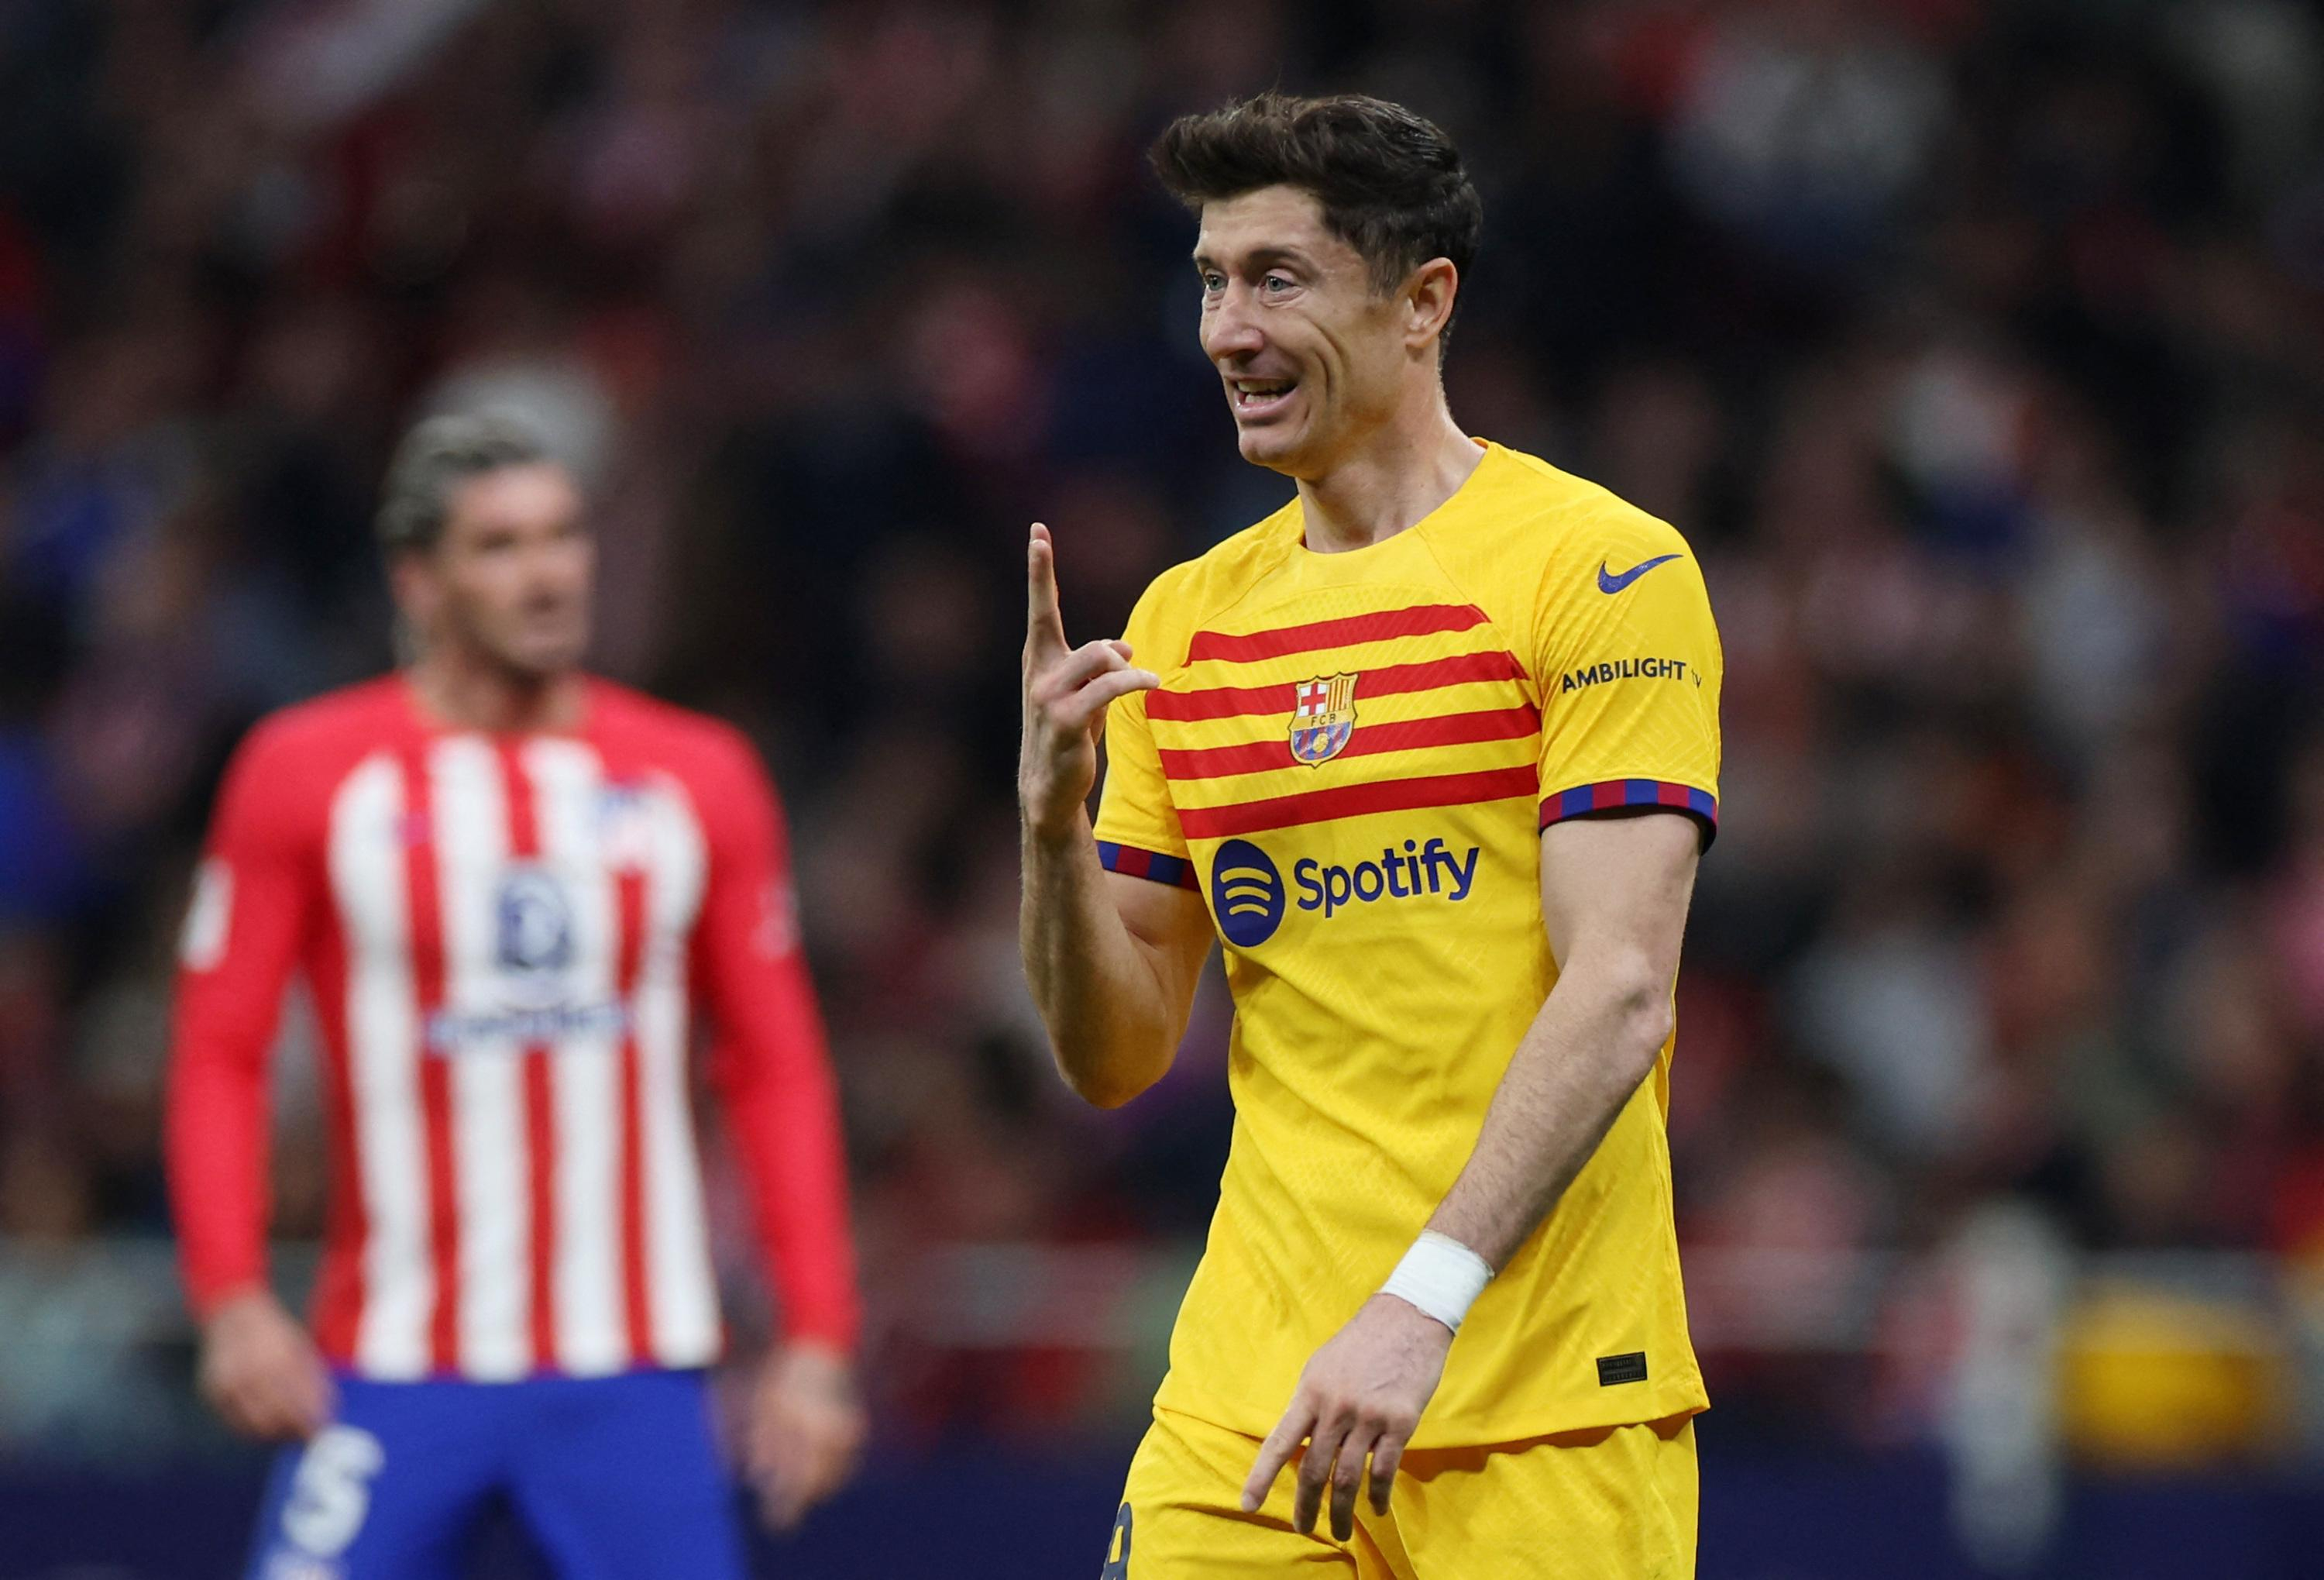 Liga: Barcelona corrects Atlético Madrid and takes second place, Lewandowski in great form